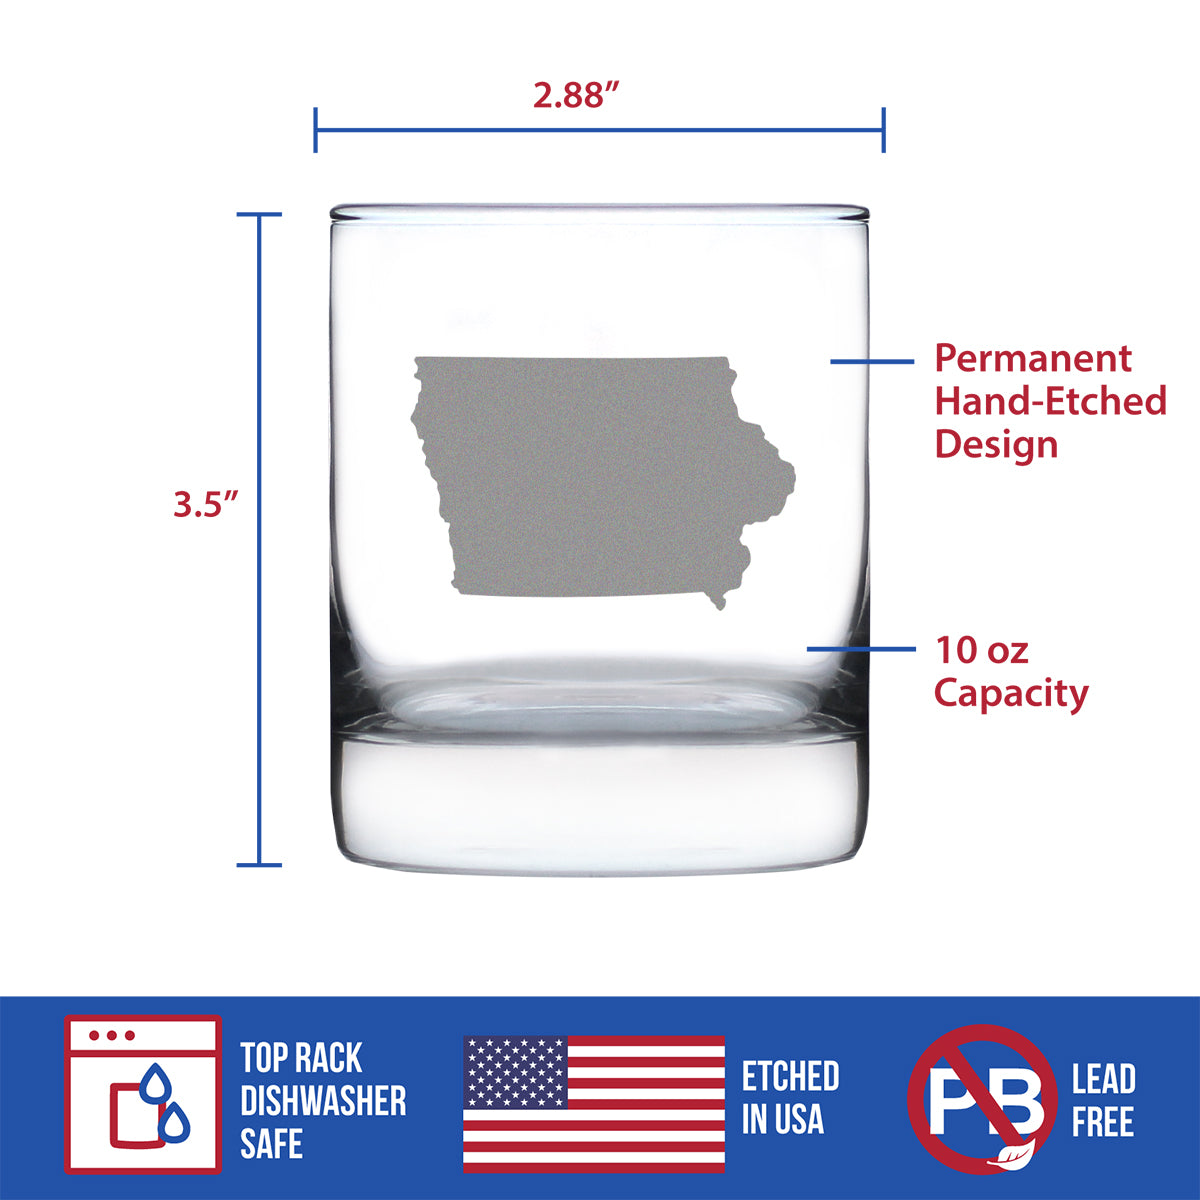 Iowa State Outline Whiskey Rocks Glass - State Themed Drinking Decor and Gifts for Iowan Women &amp; Men - 10.25 Oz Whisky Tumbler Glasses